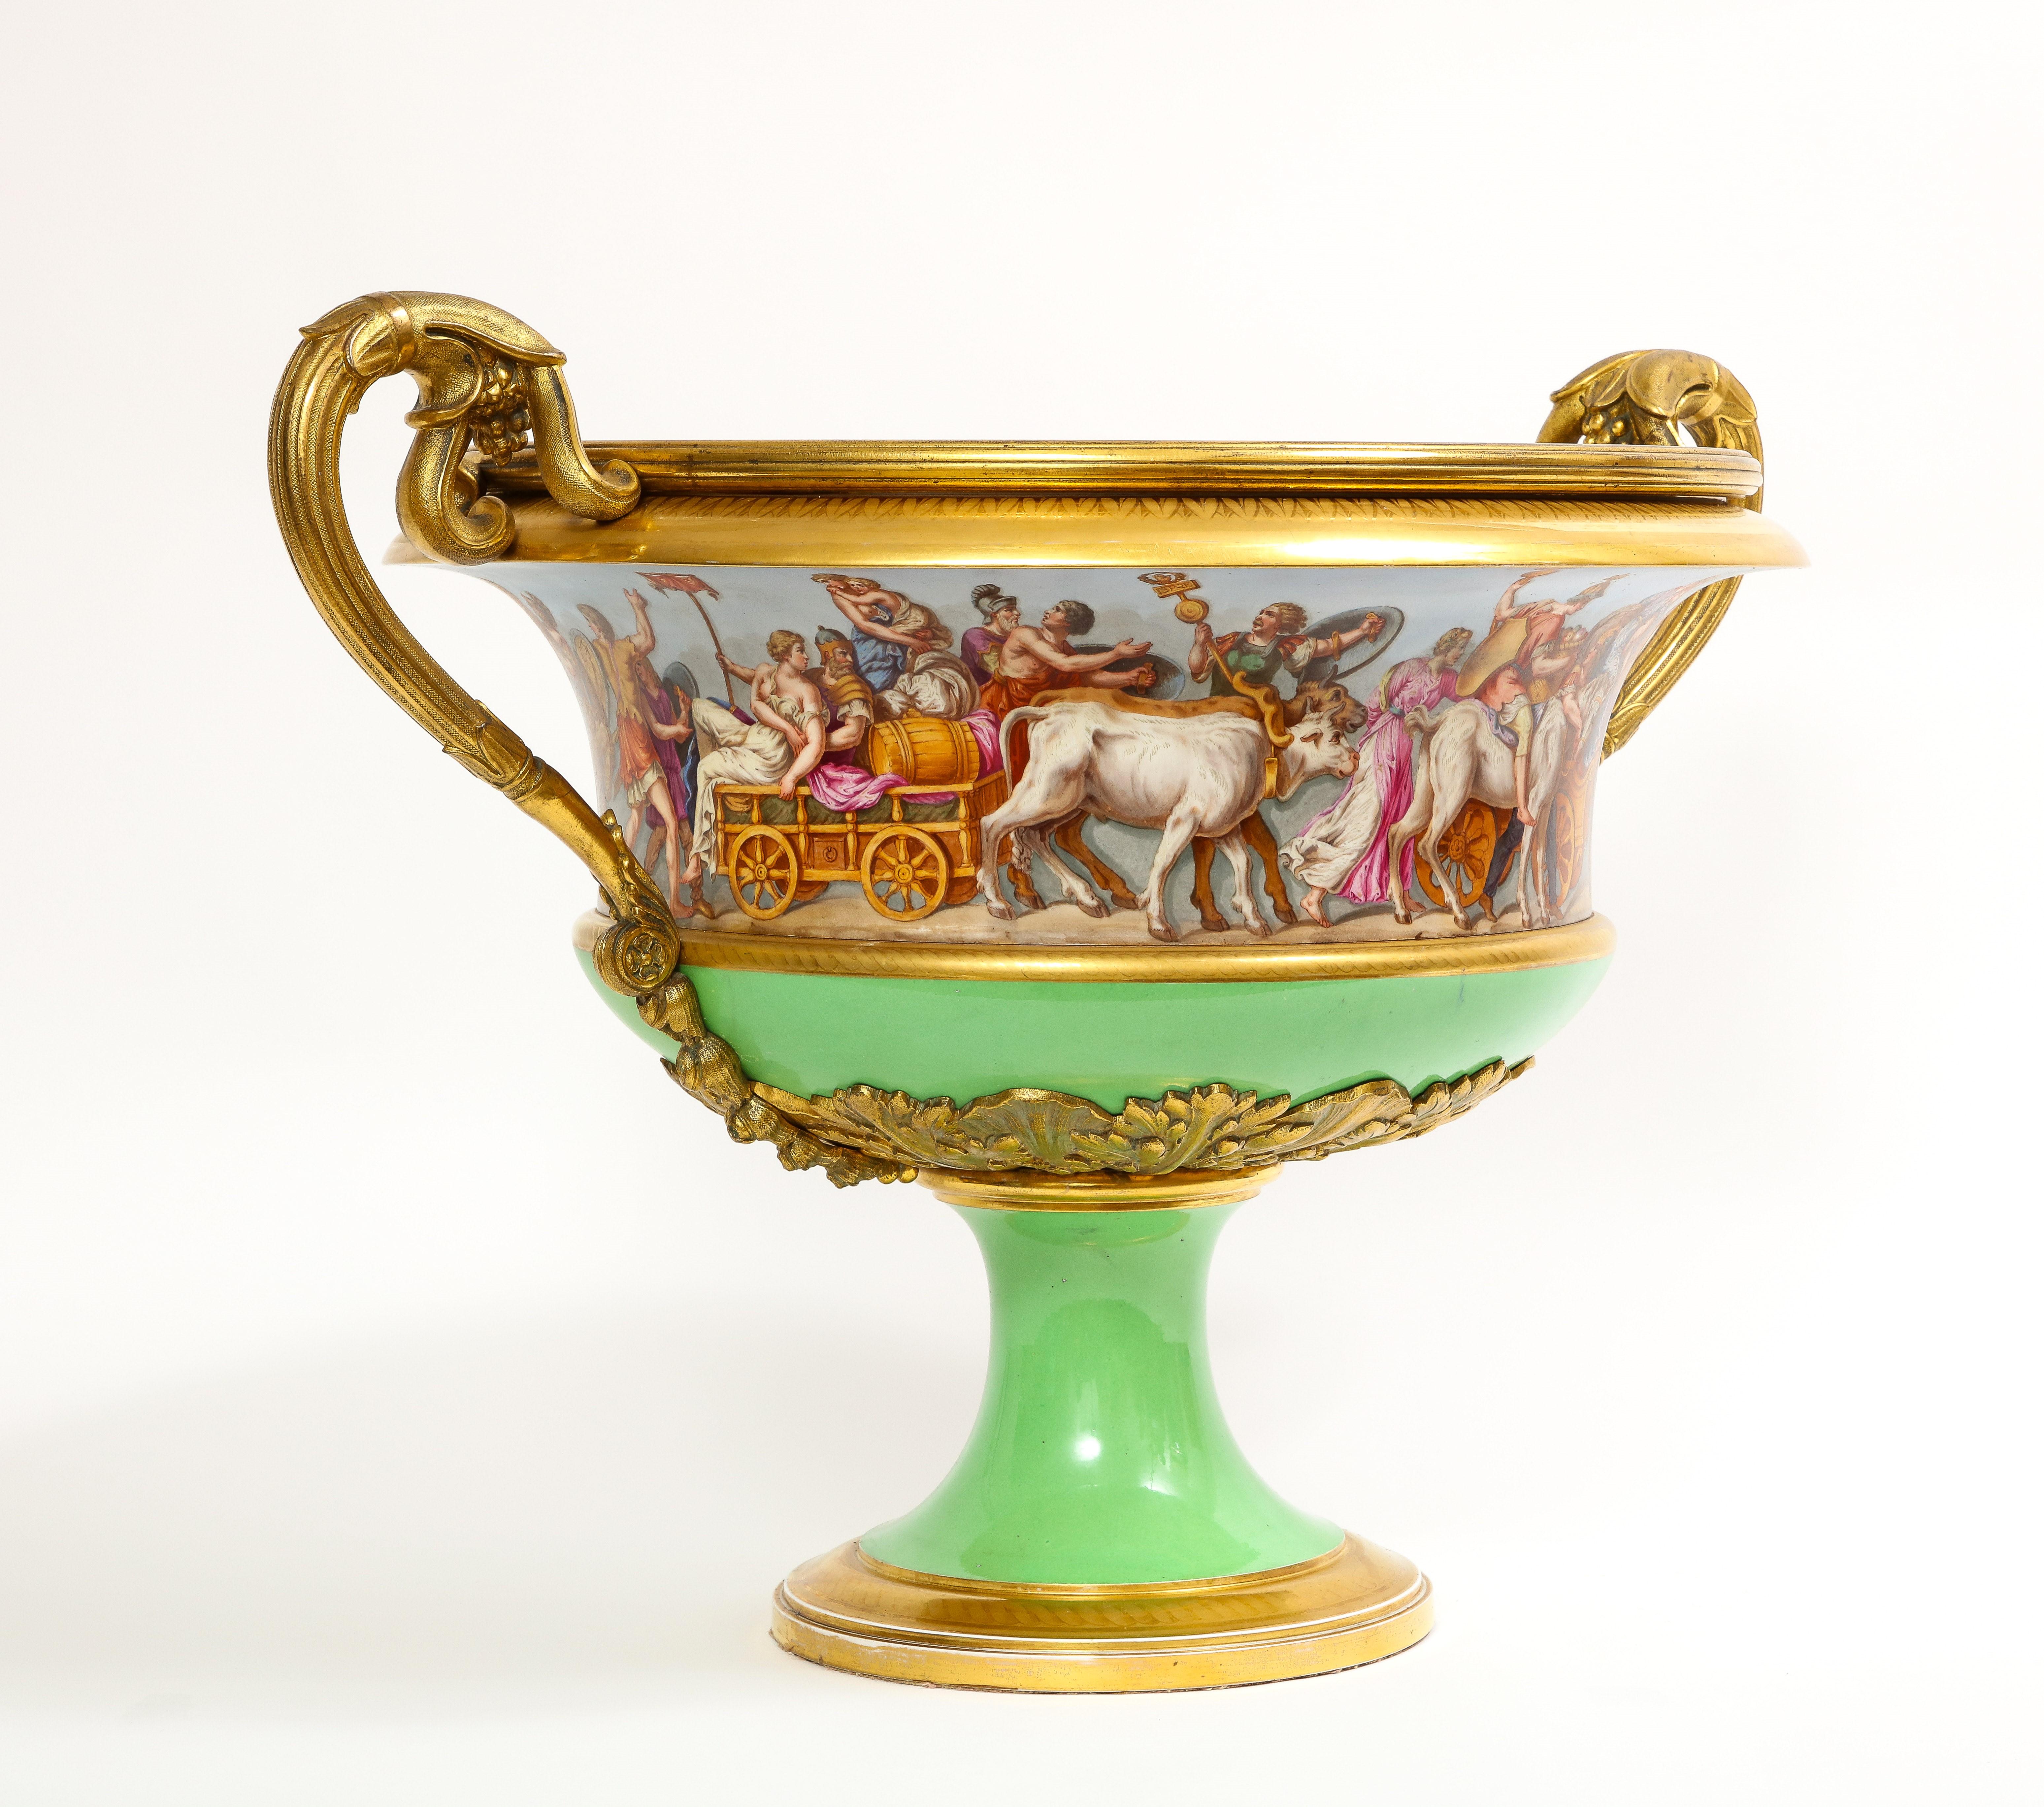 Hand-Painted Monumental Sevres Porcelain Ormolu-Mounted 2-Handle Campana Form Centerpiece For Sale